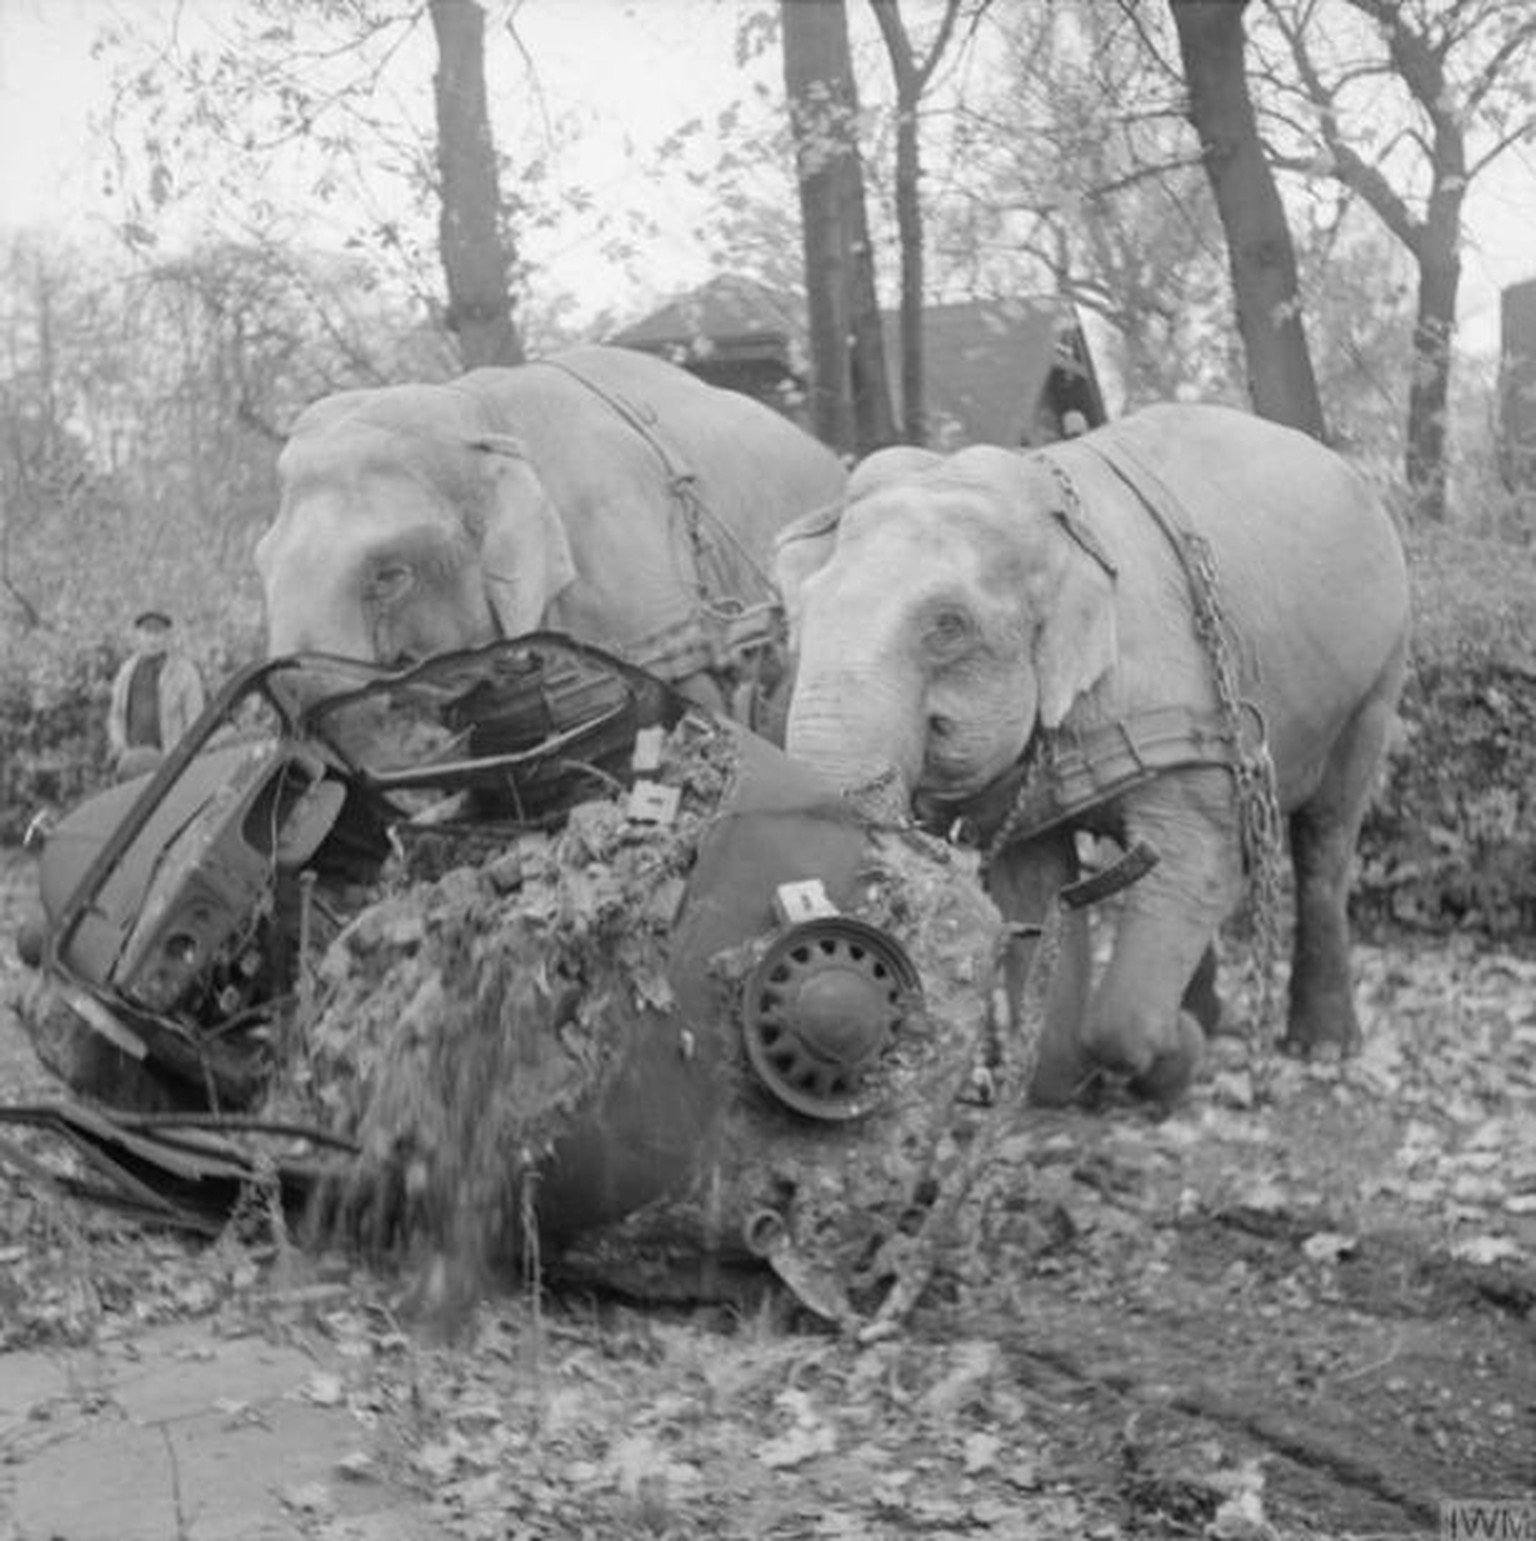 Kiri and Many were circus elephants in Hamburg, Germany. During the Second World War, their strength was mobilised by local authorities to clear the wreckage resulting from Allied bombing raids. Kiri  ...